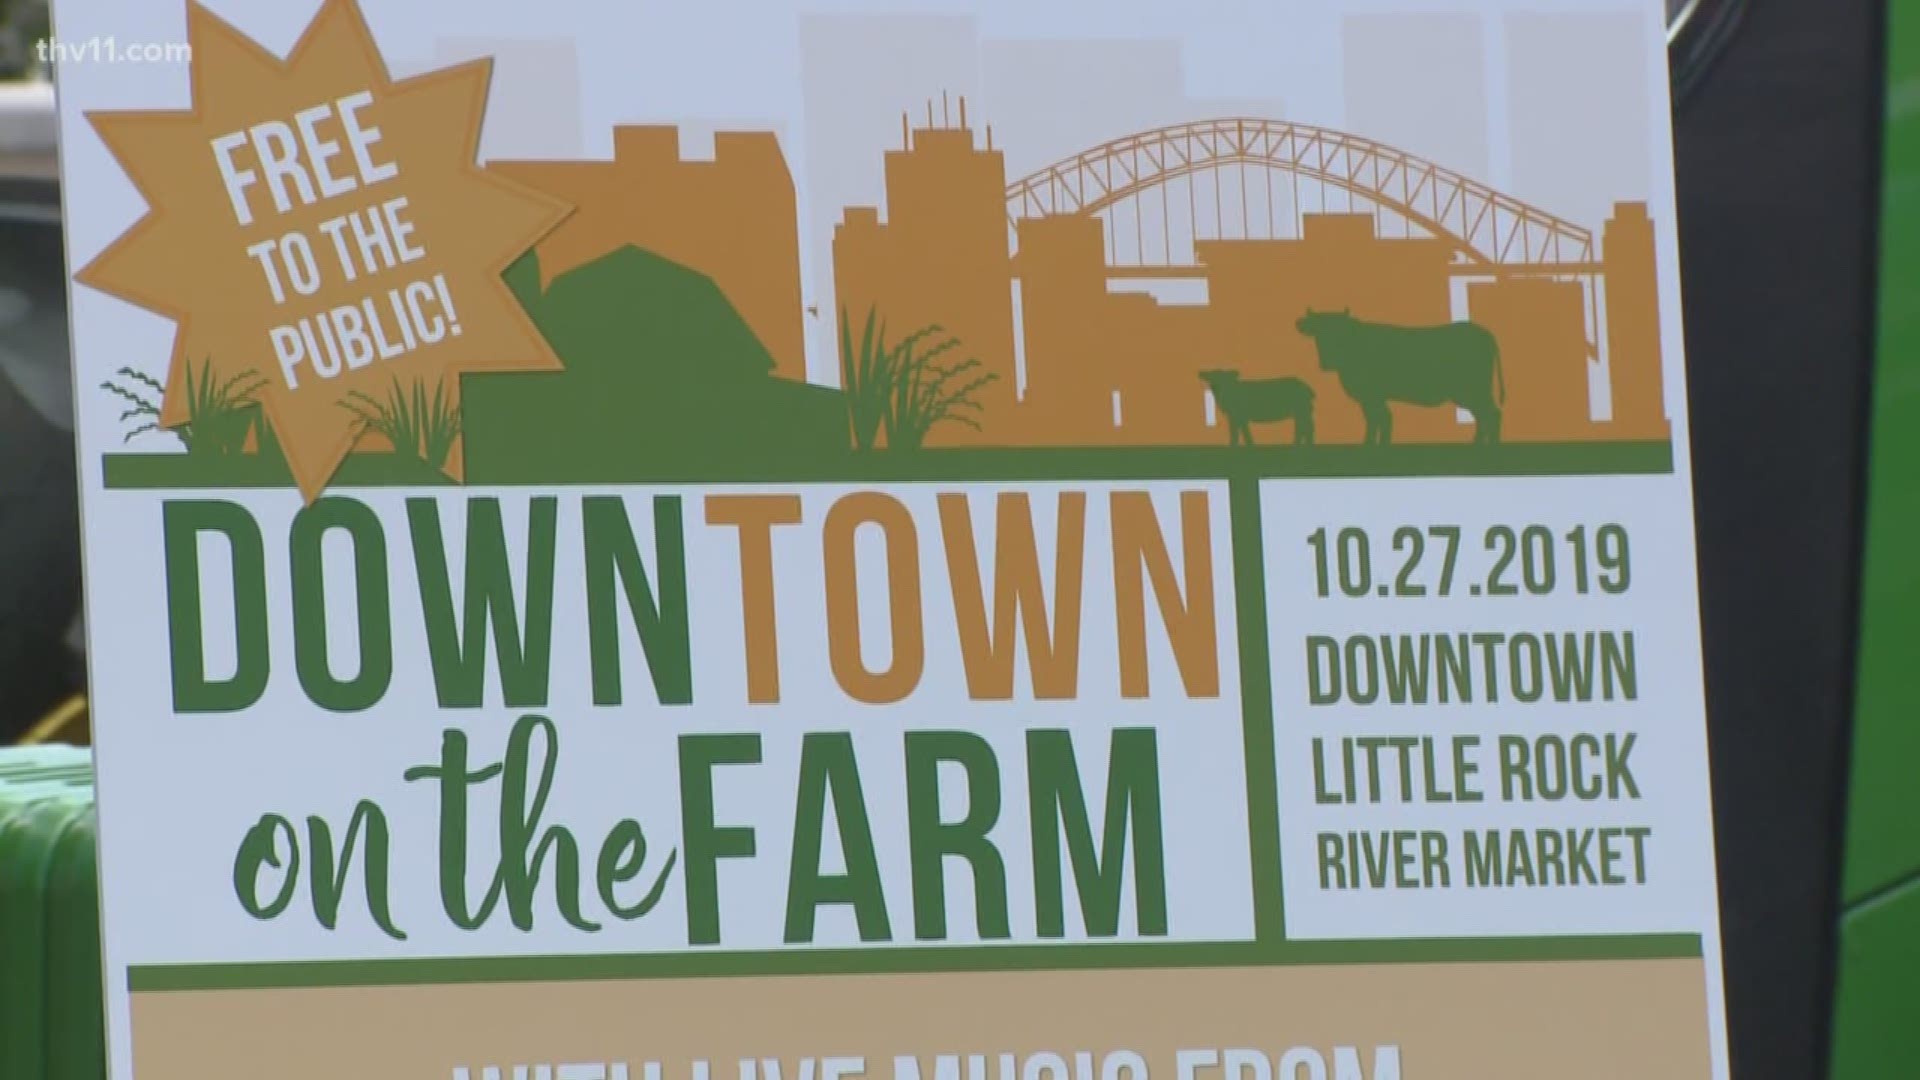 One event aims to bring rural Arkansas to the spotlight in urban Little Rock as Arkansas Rice and downtown Little Rock partnership announces the new 'Downtown on the Farm.'